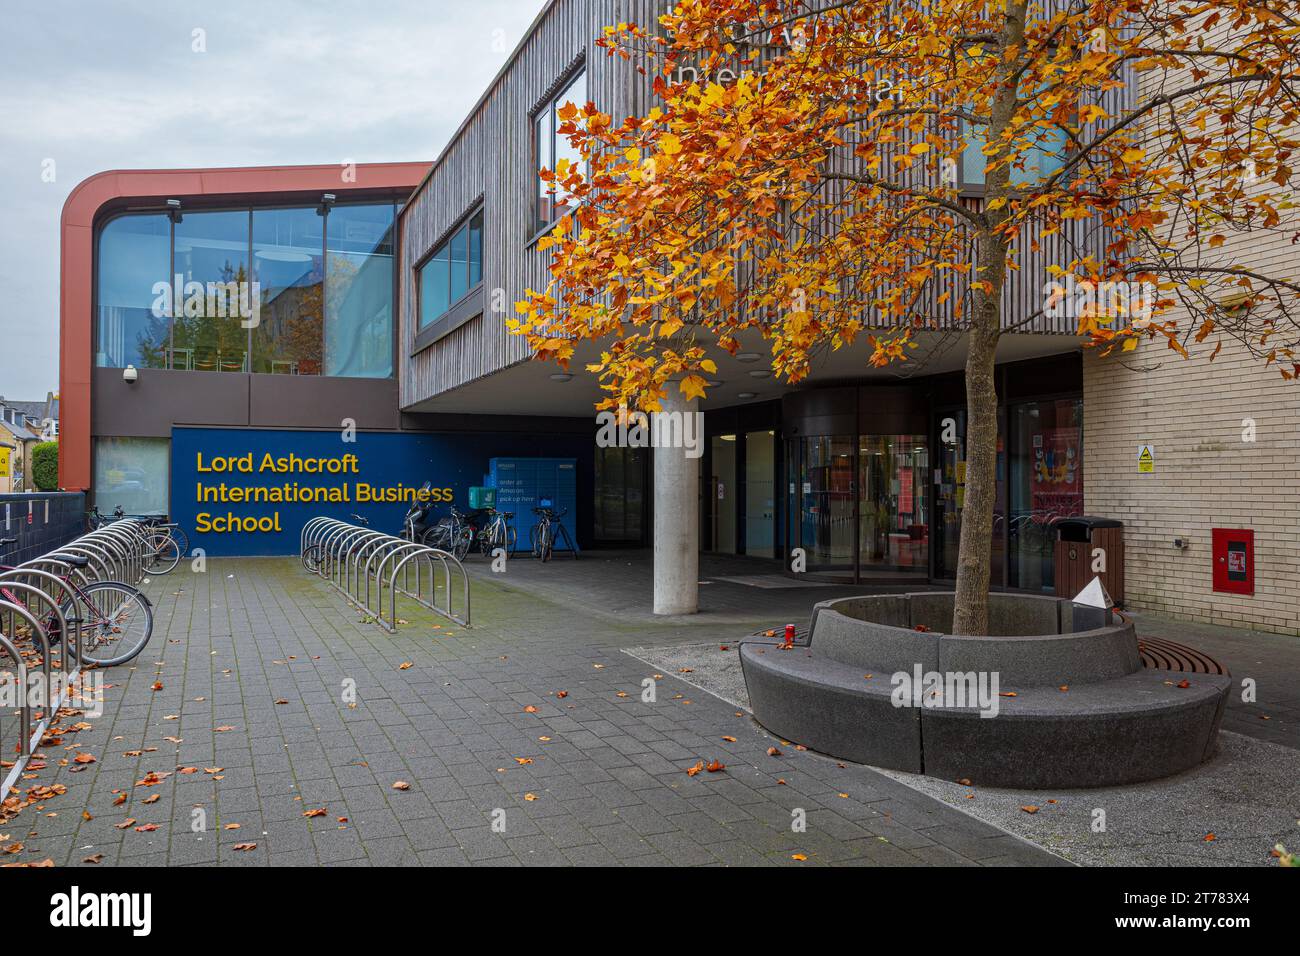 The Lord Ashcroft International Business School building at the Cambridge Campus of the Anglia Ruskin University, Cambridge, UK. Stock Photo